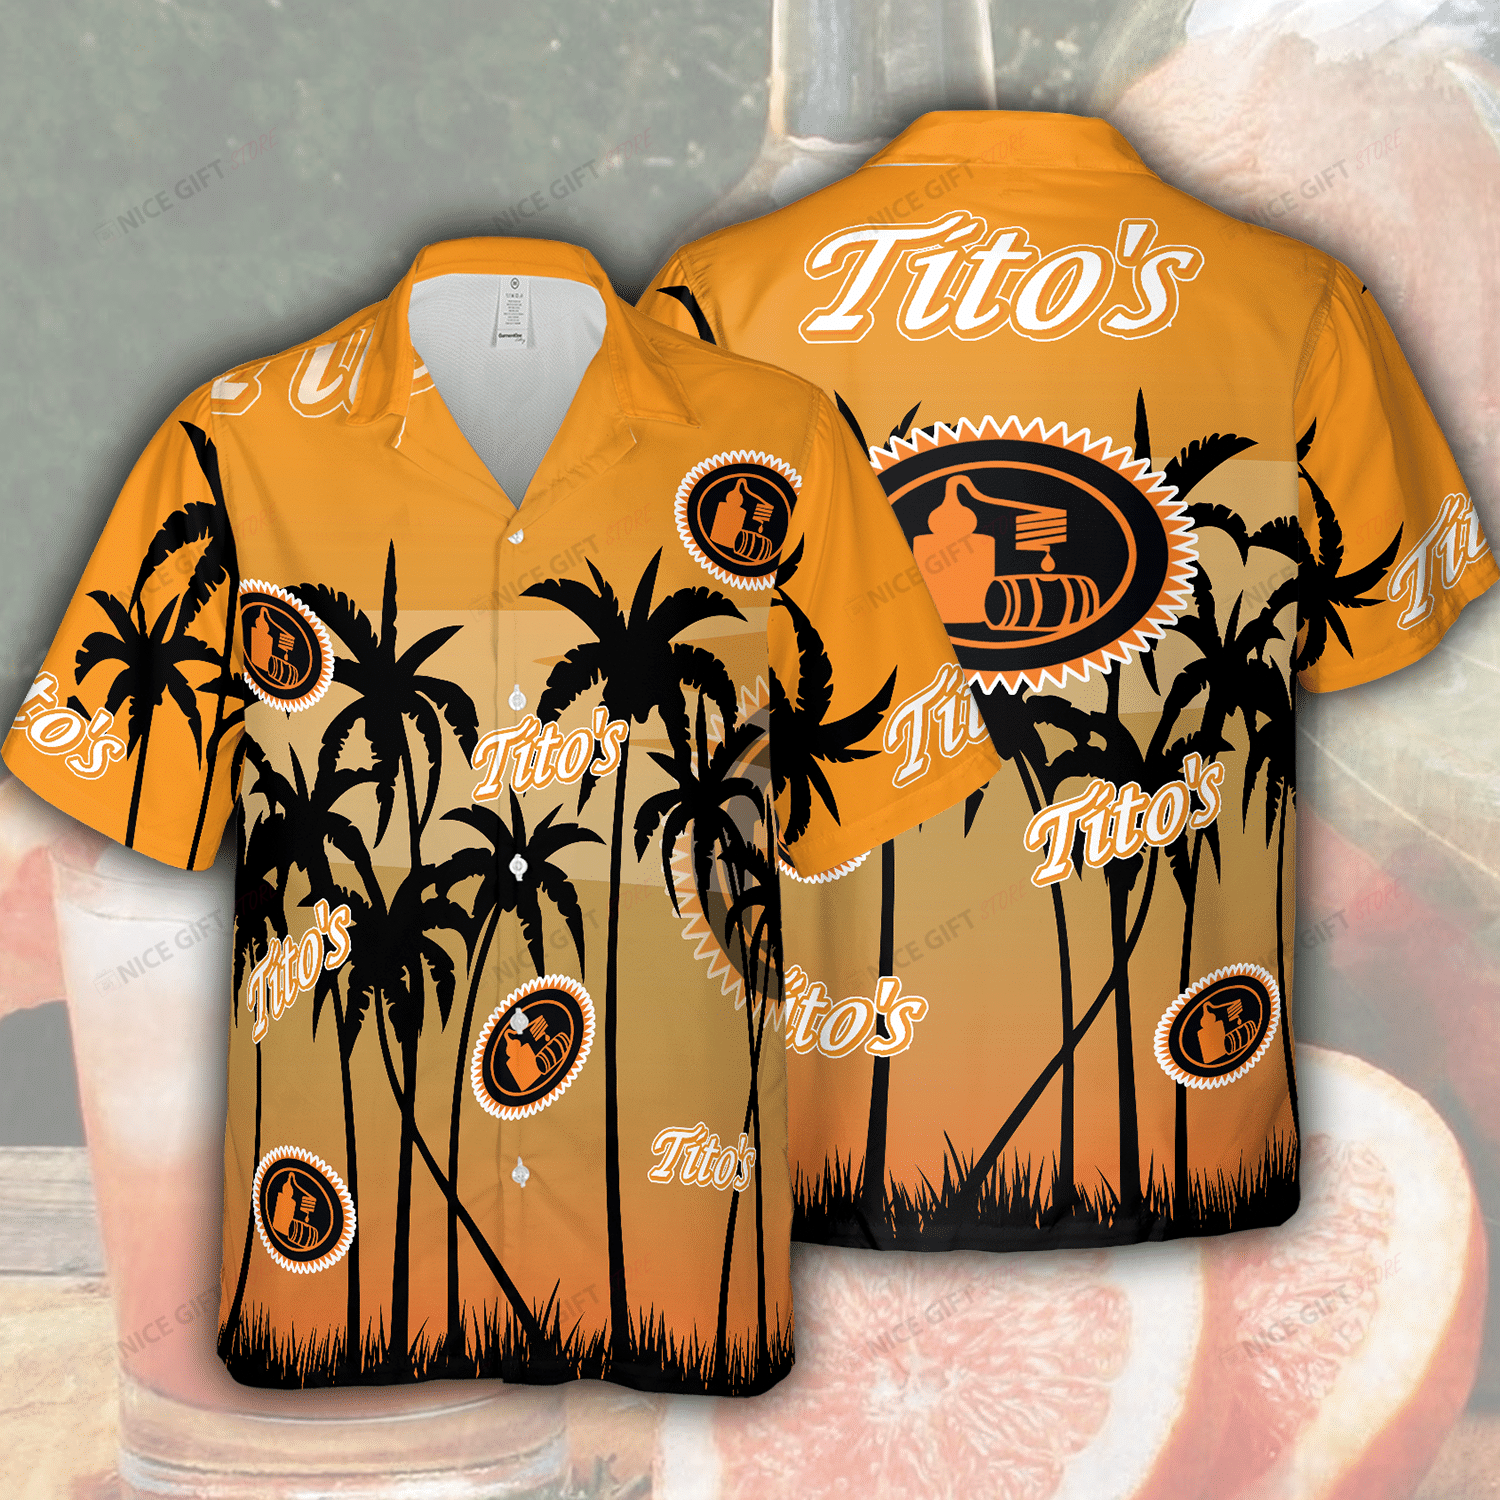 If you're a fan of a Hawaiian Shirt, you can choose one at our store 76